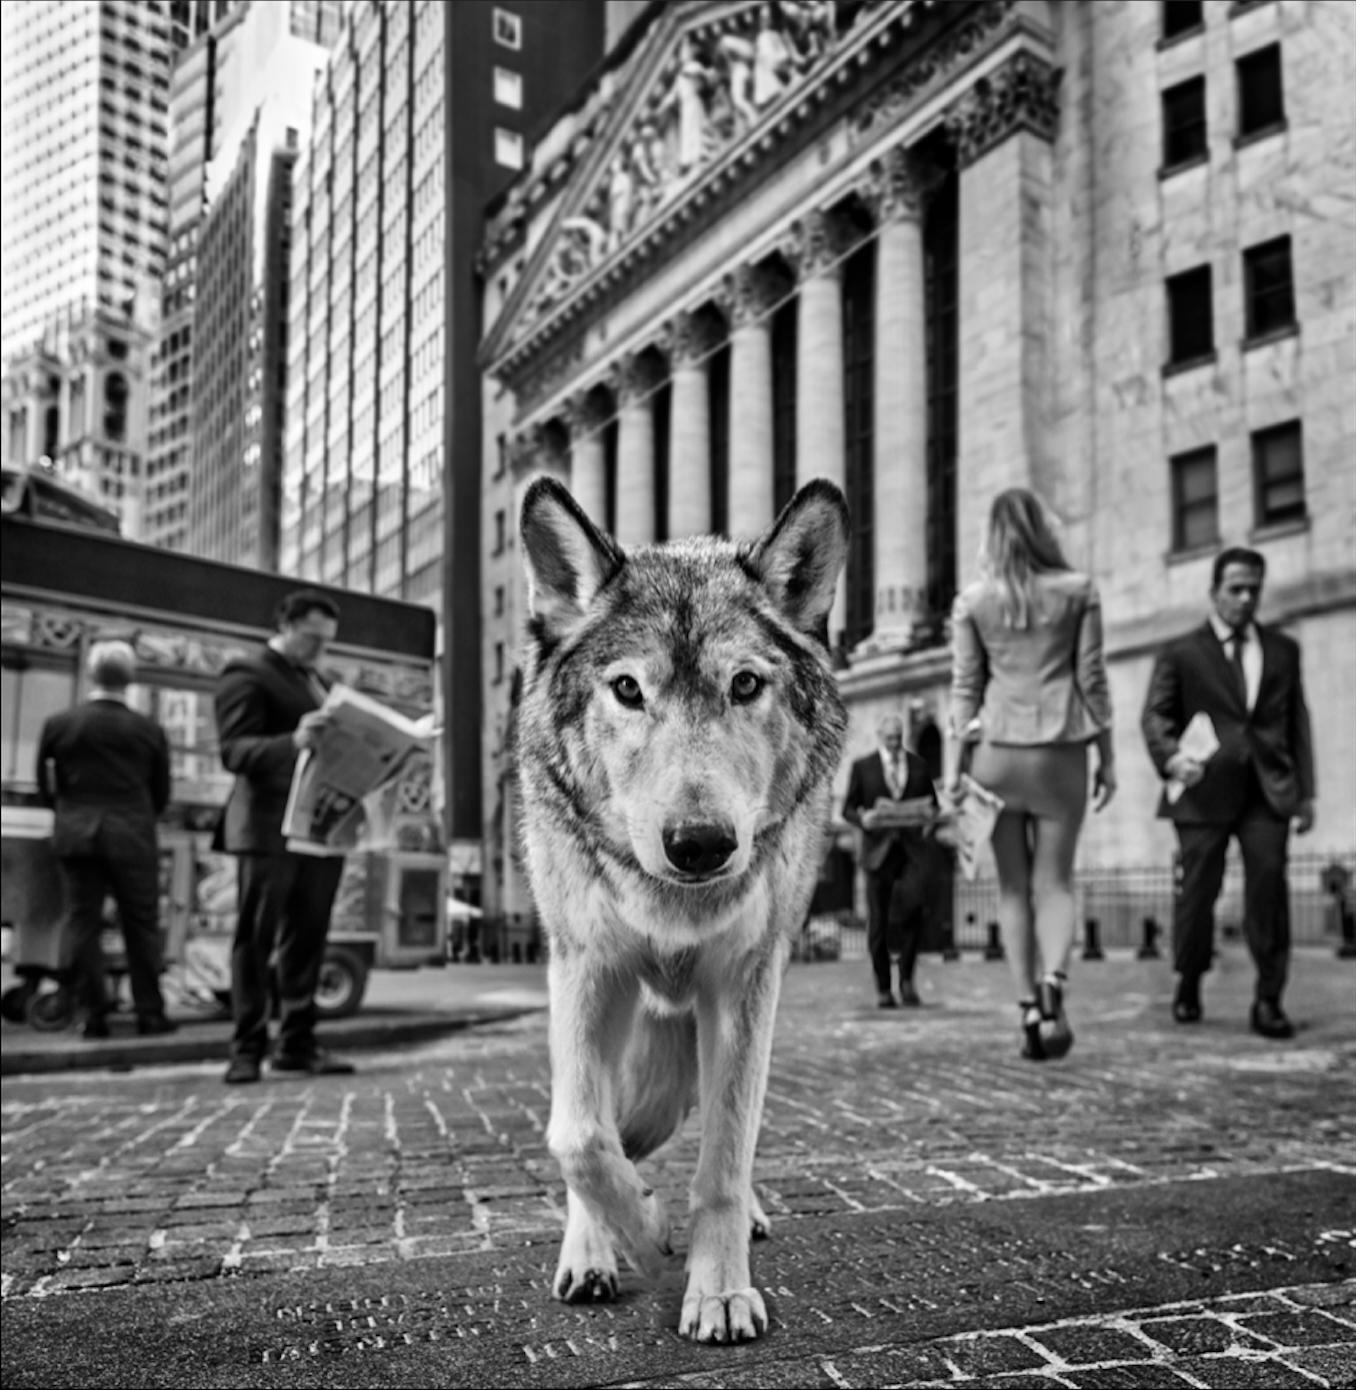 David Yarrow Black and White Photograph – Once Upon A Time an der Wall Street